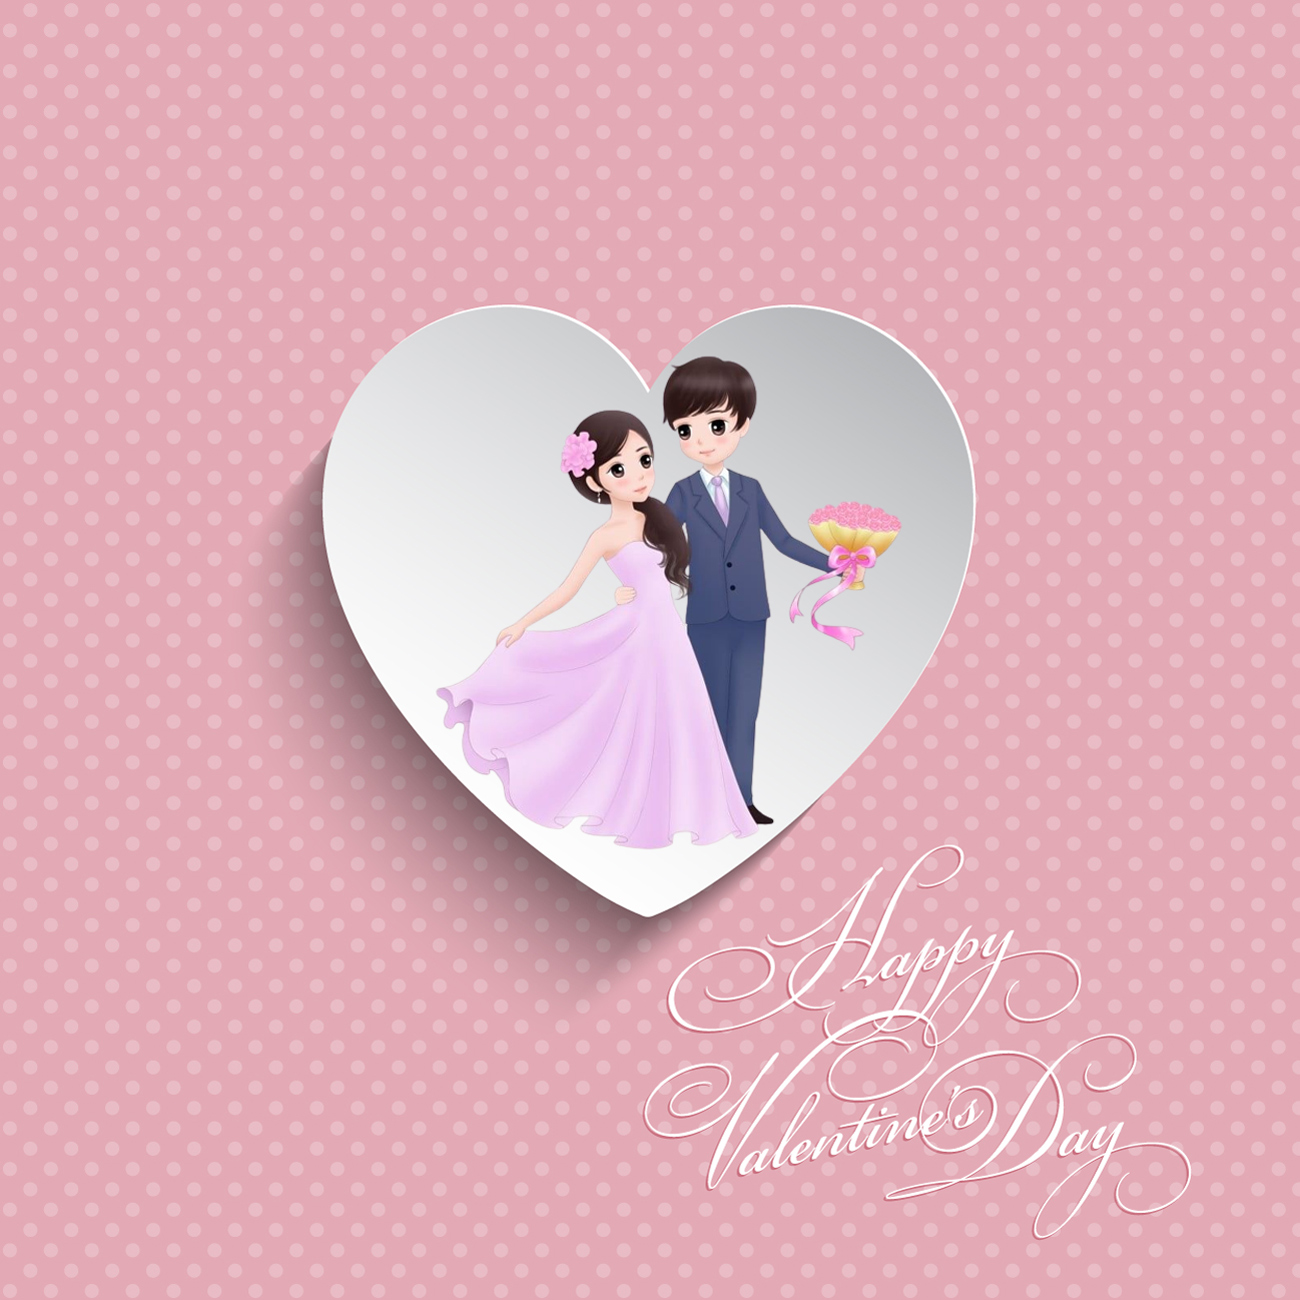 Purple Themed Happy Valentine’s Day Greeting Card